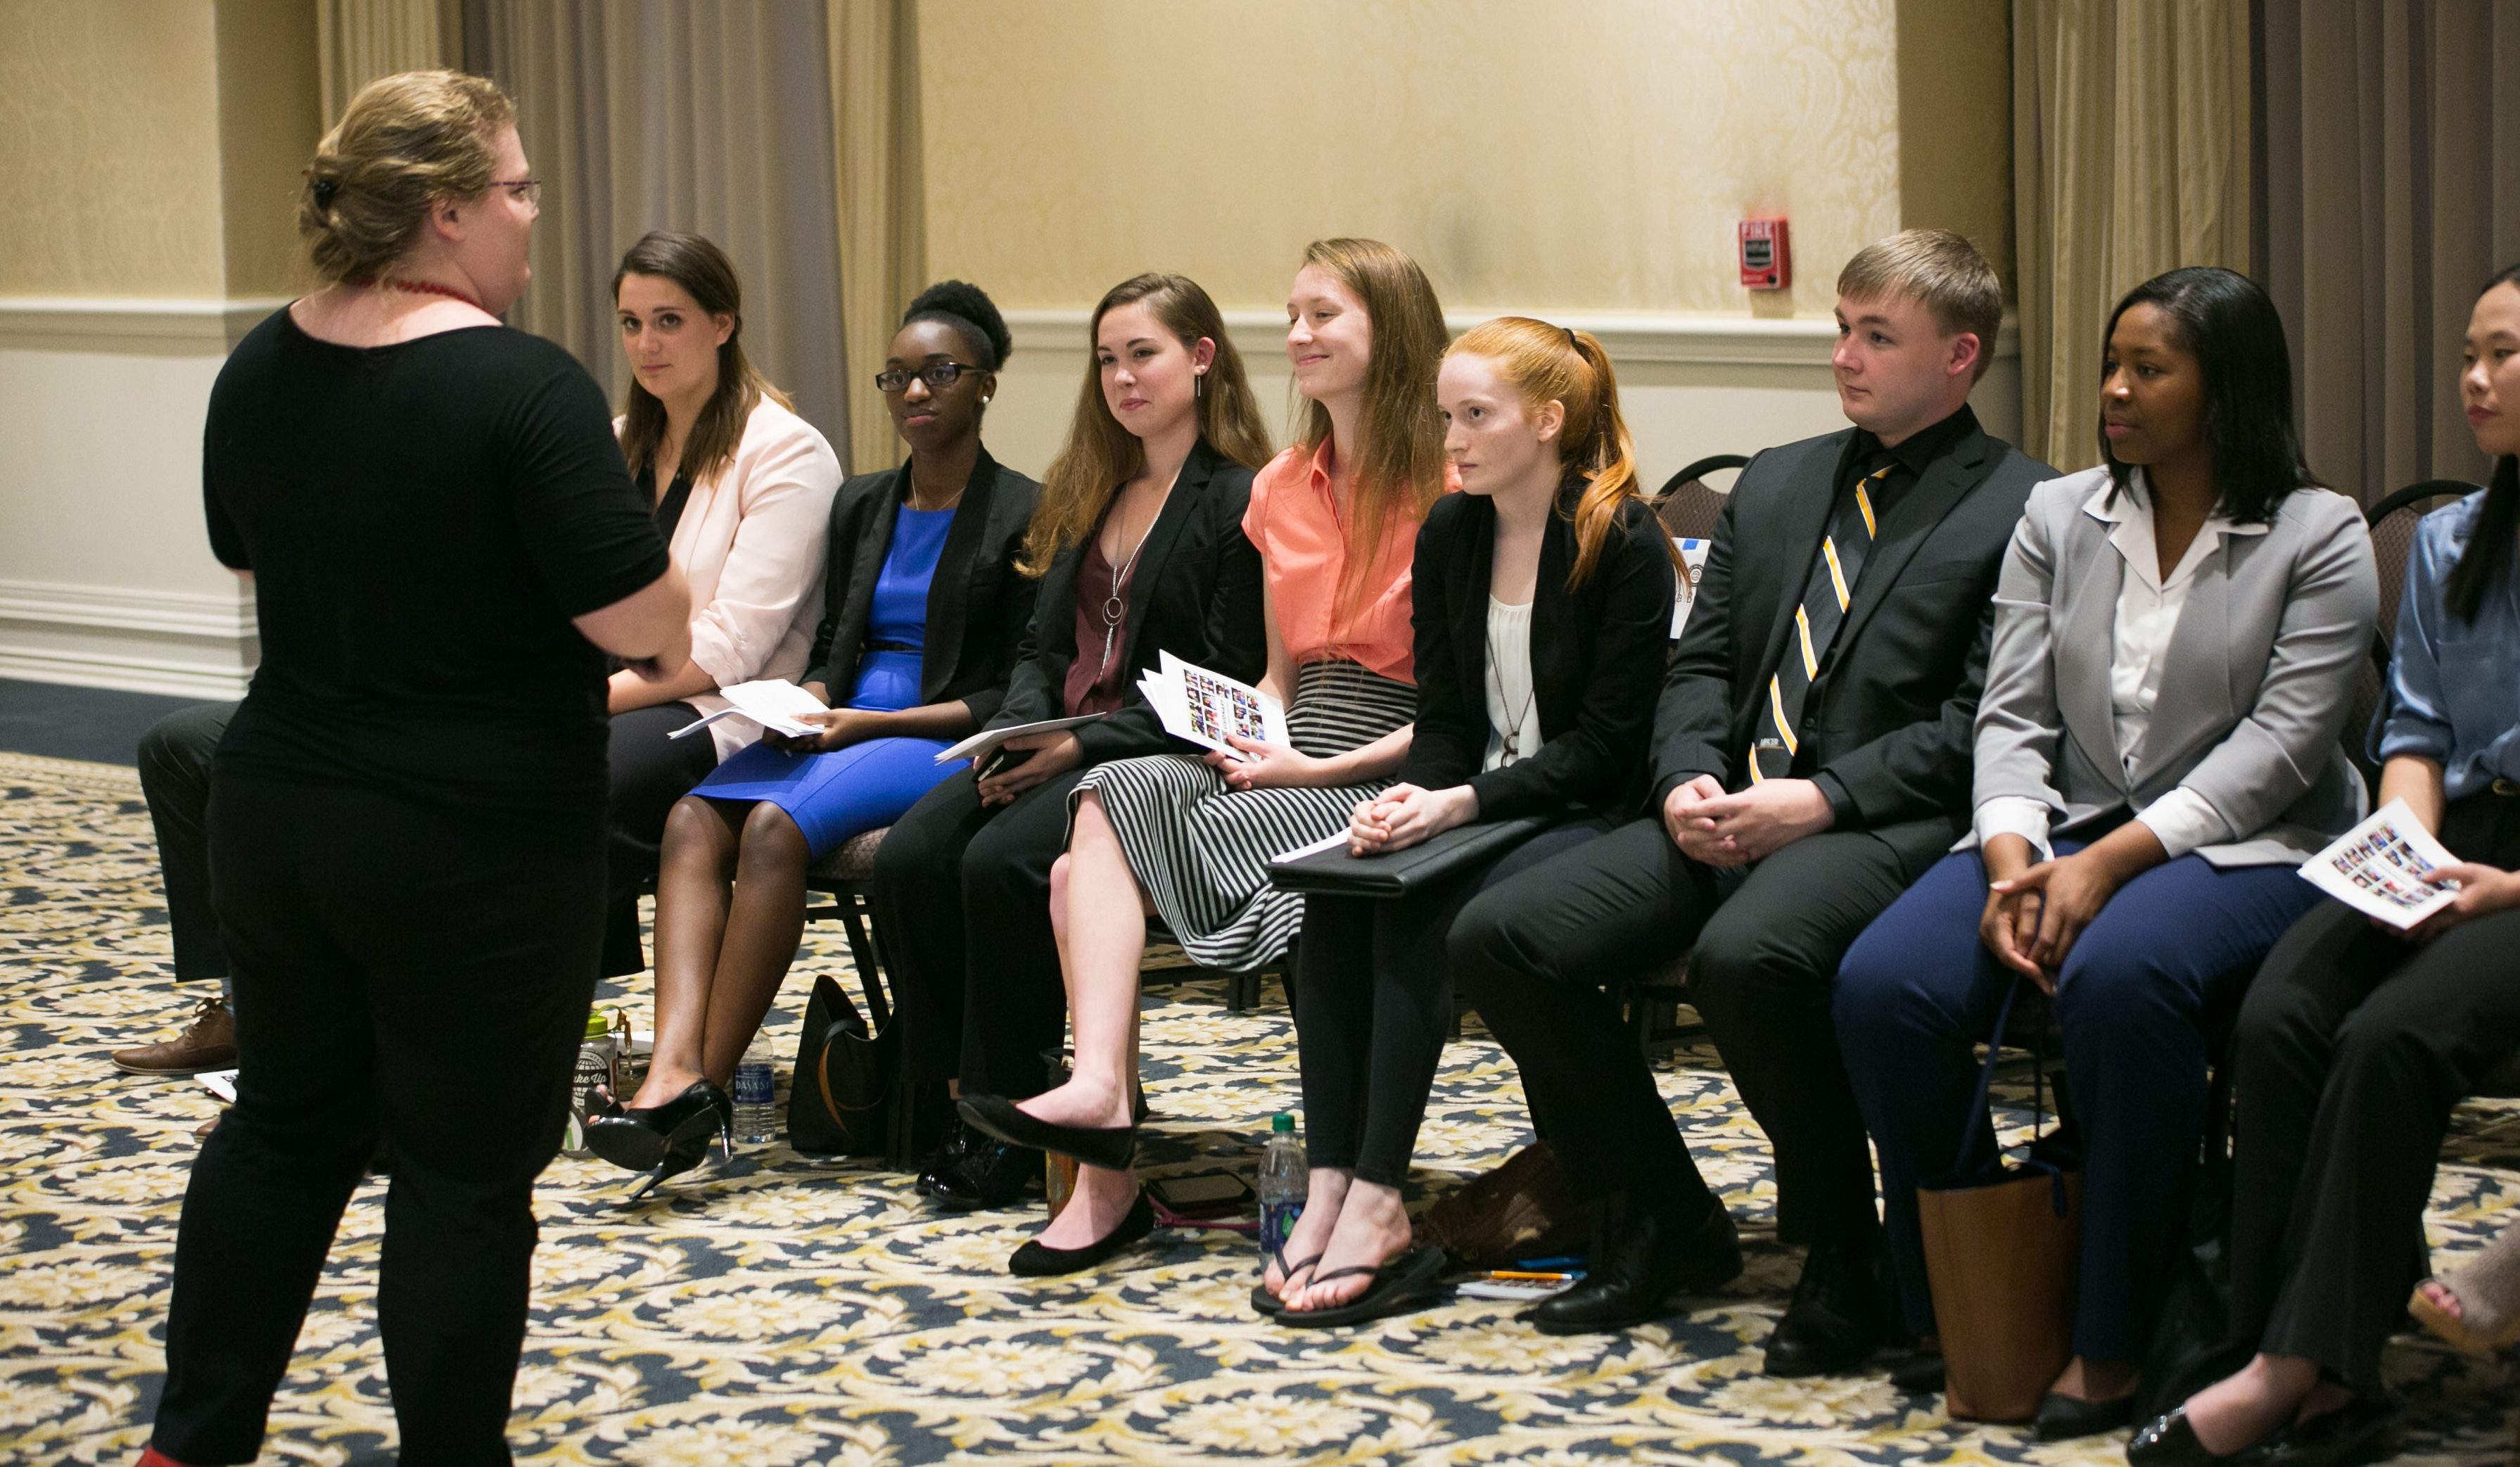 Mercer Quality Enhancement Plan Associate Director Hannah Vann Nabi talks with students presenting at the 2018 Visionary Student Panel event.